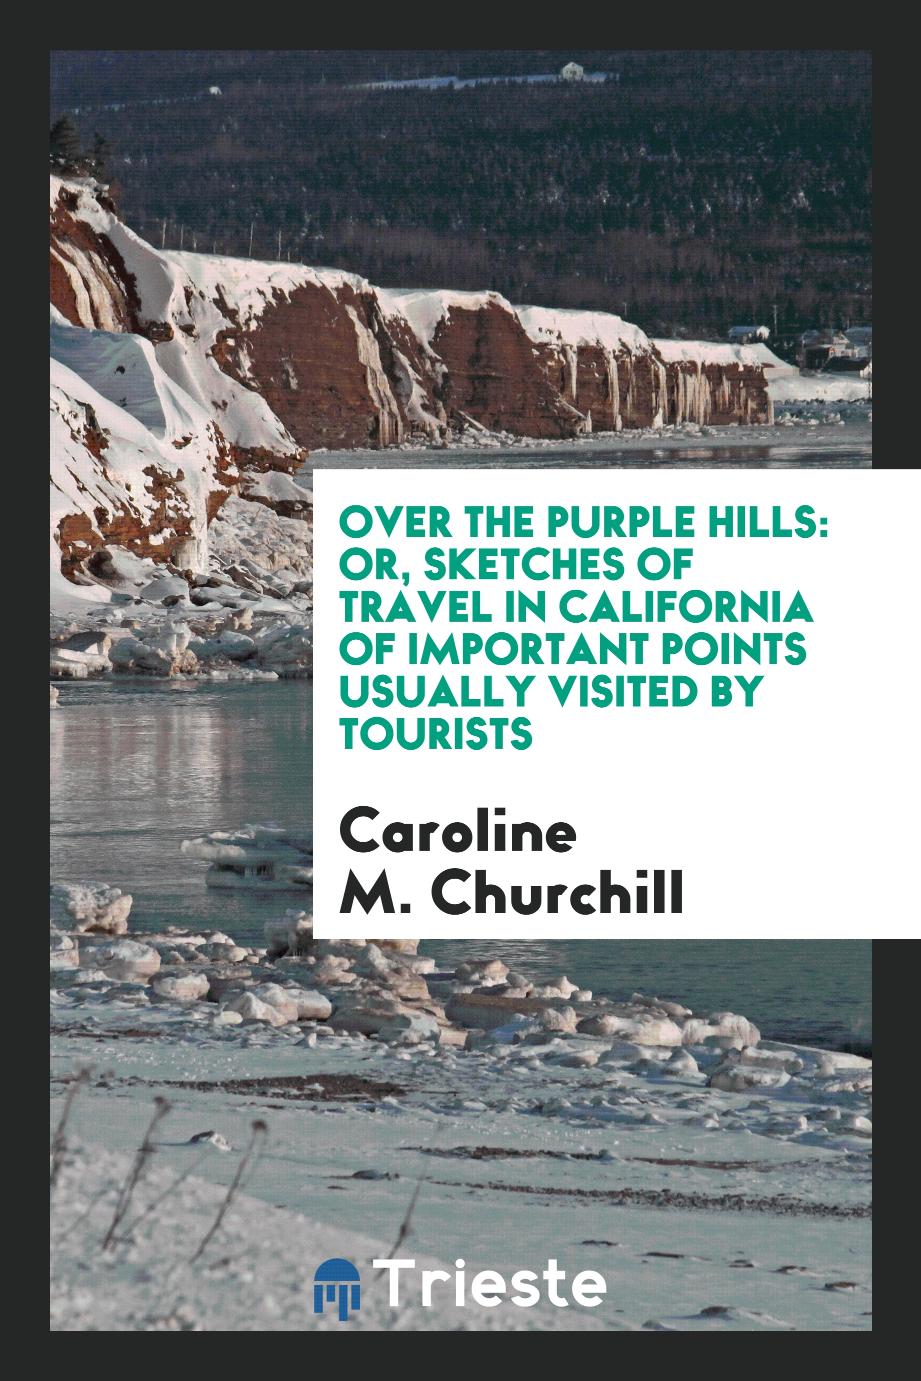 Over the purple hills: or, Sketches of travel in California of important points usually visited by tourists